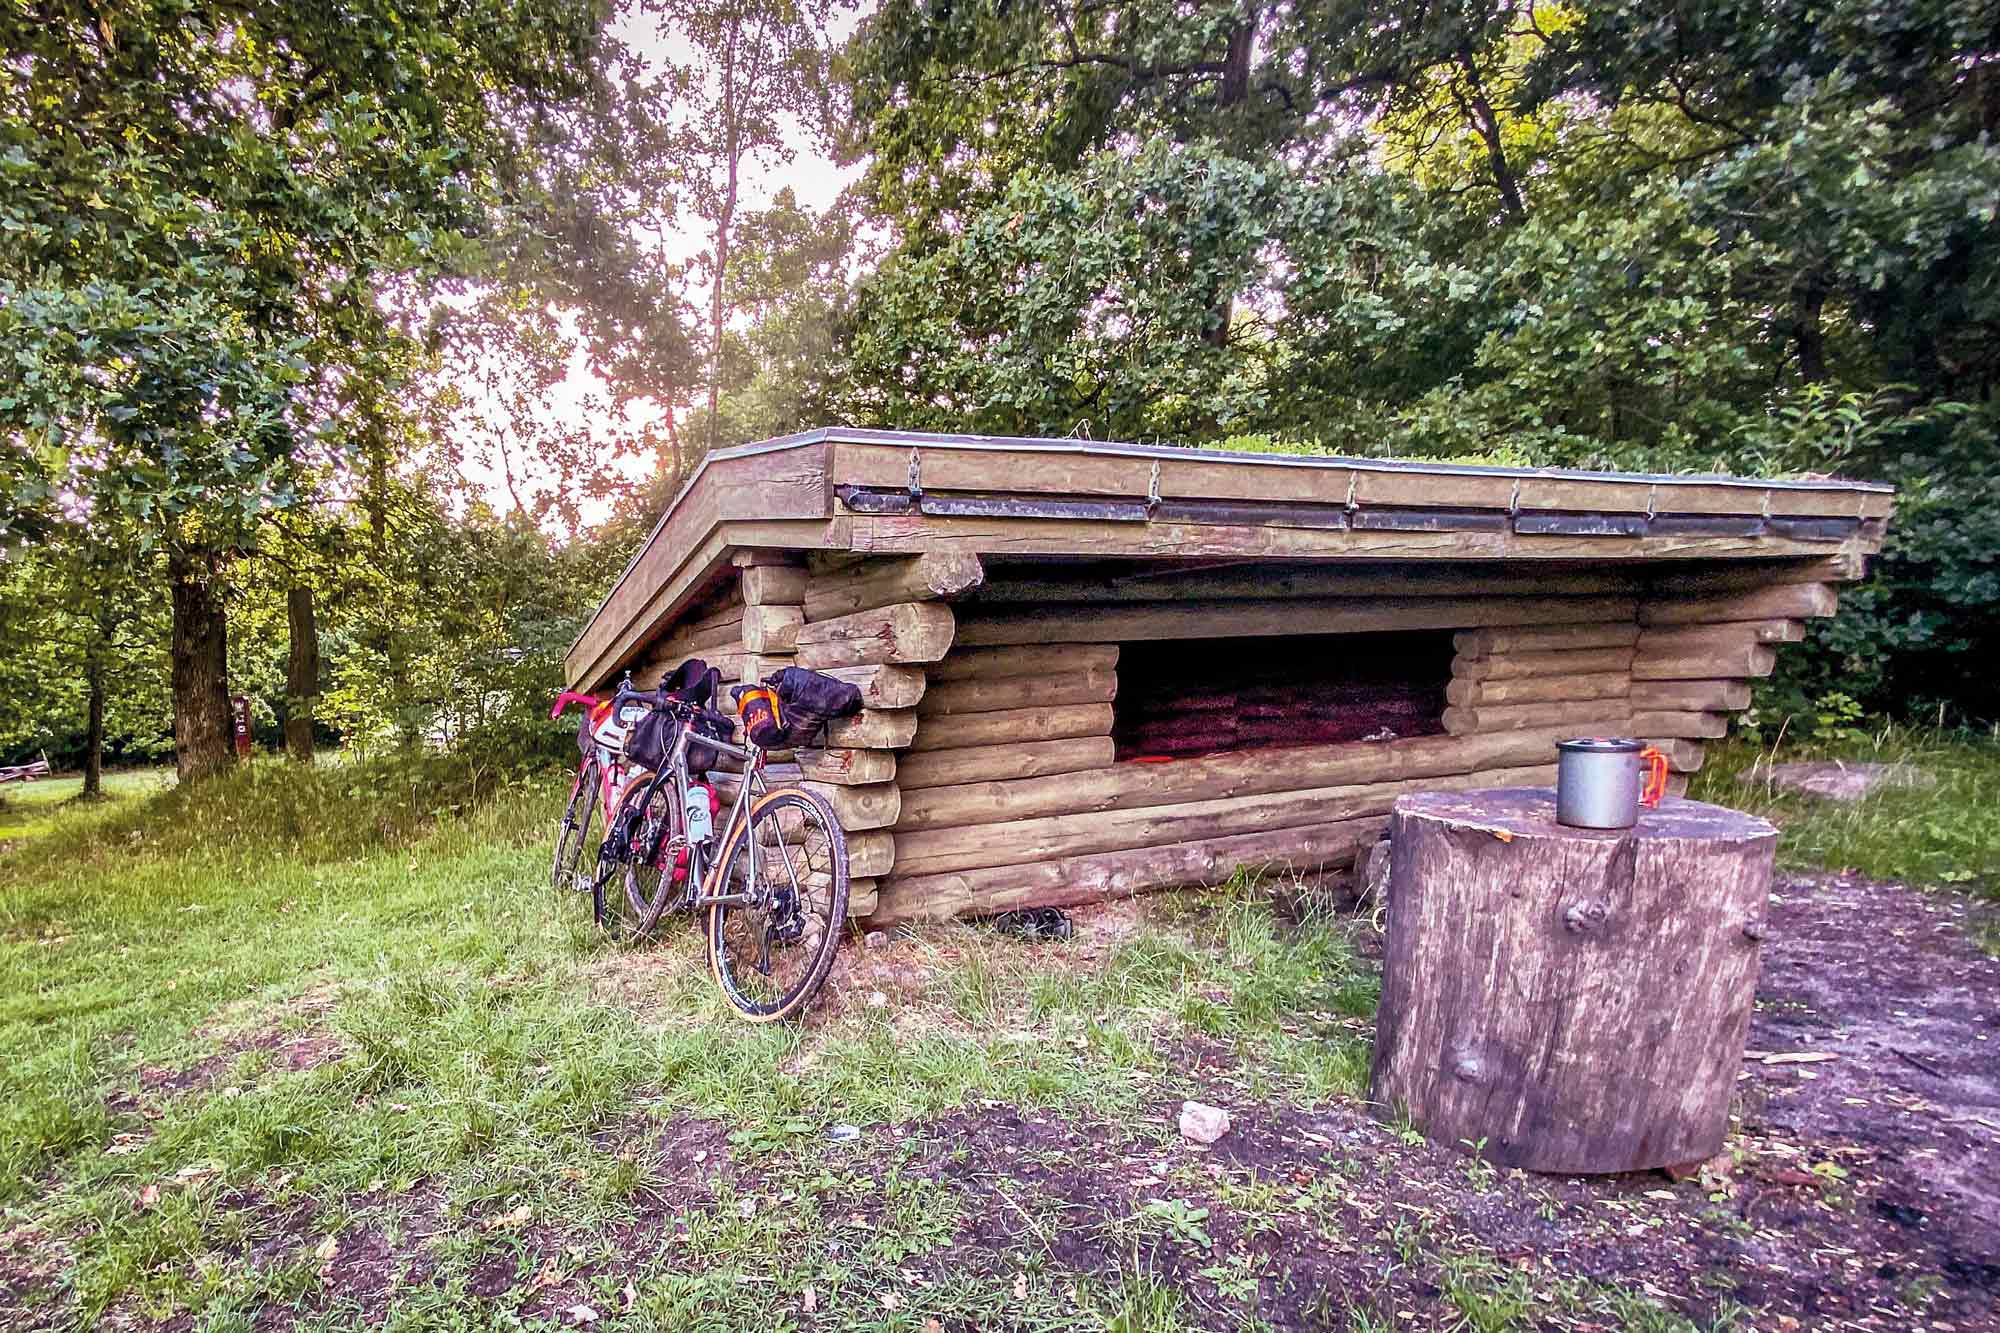 A roof over your head is a great thing when spending the night in the great outdoors! In denmark you will find many such shelters and therefore ideal conditions for bikepacking in denmark.